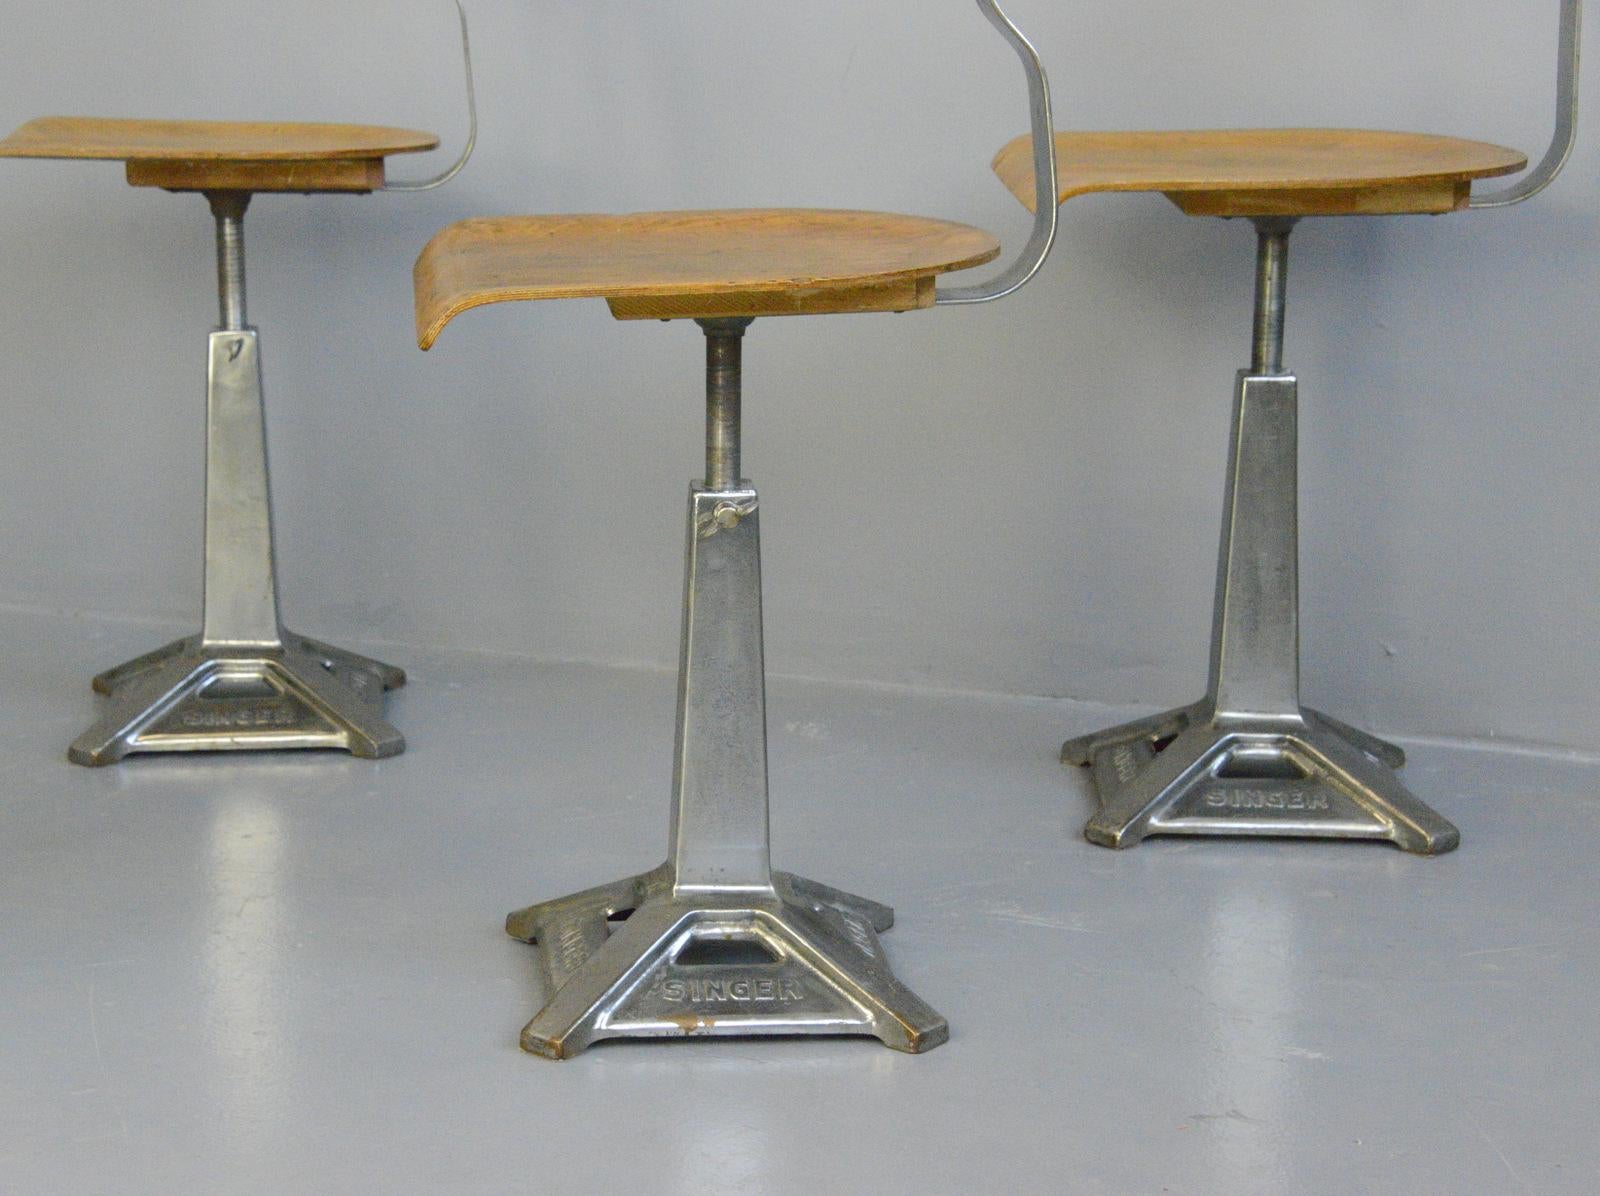 Mid-20th Century Industrial Chairs by Singer, Circa 1930s